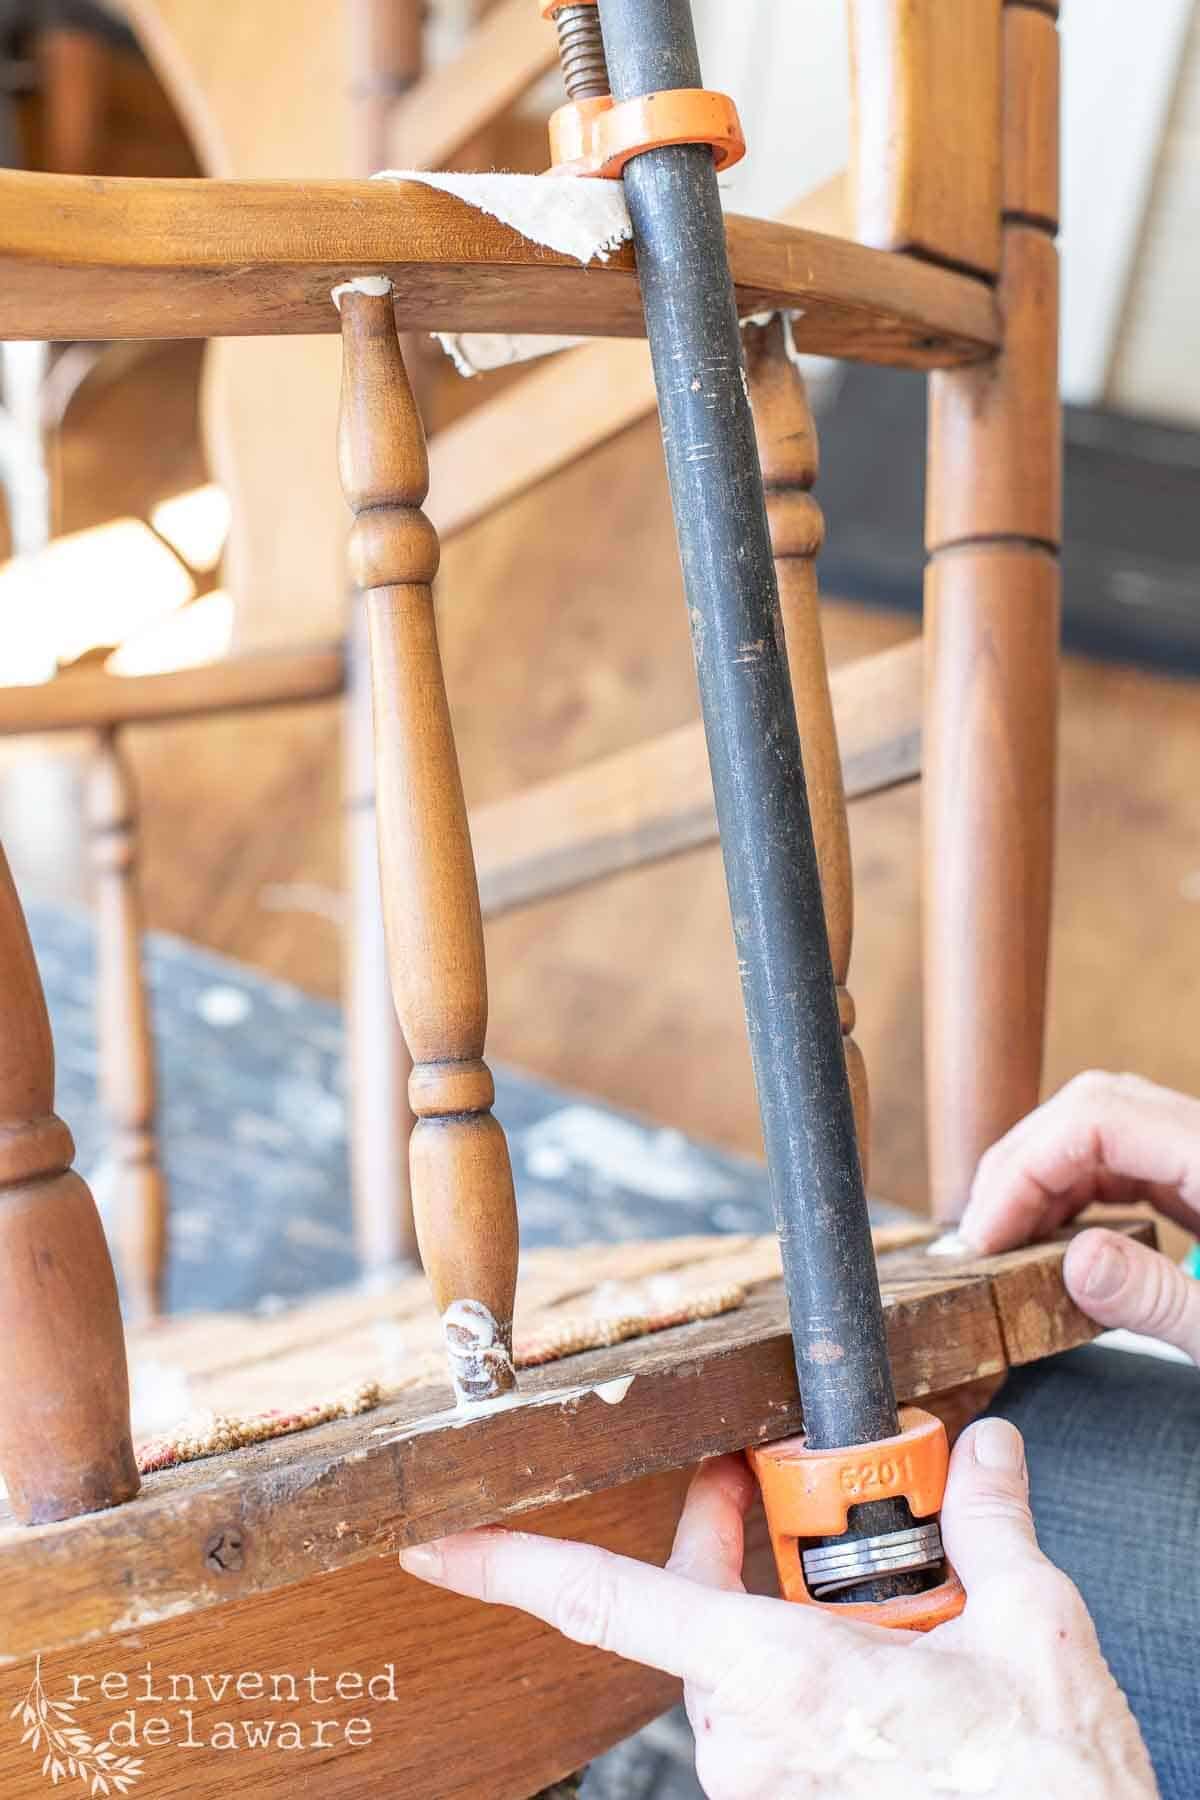 lady glueing and clamping an old piece of furniture